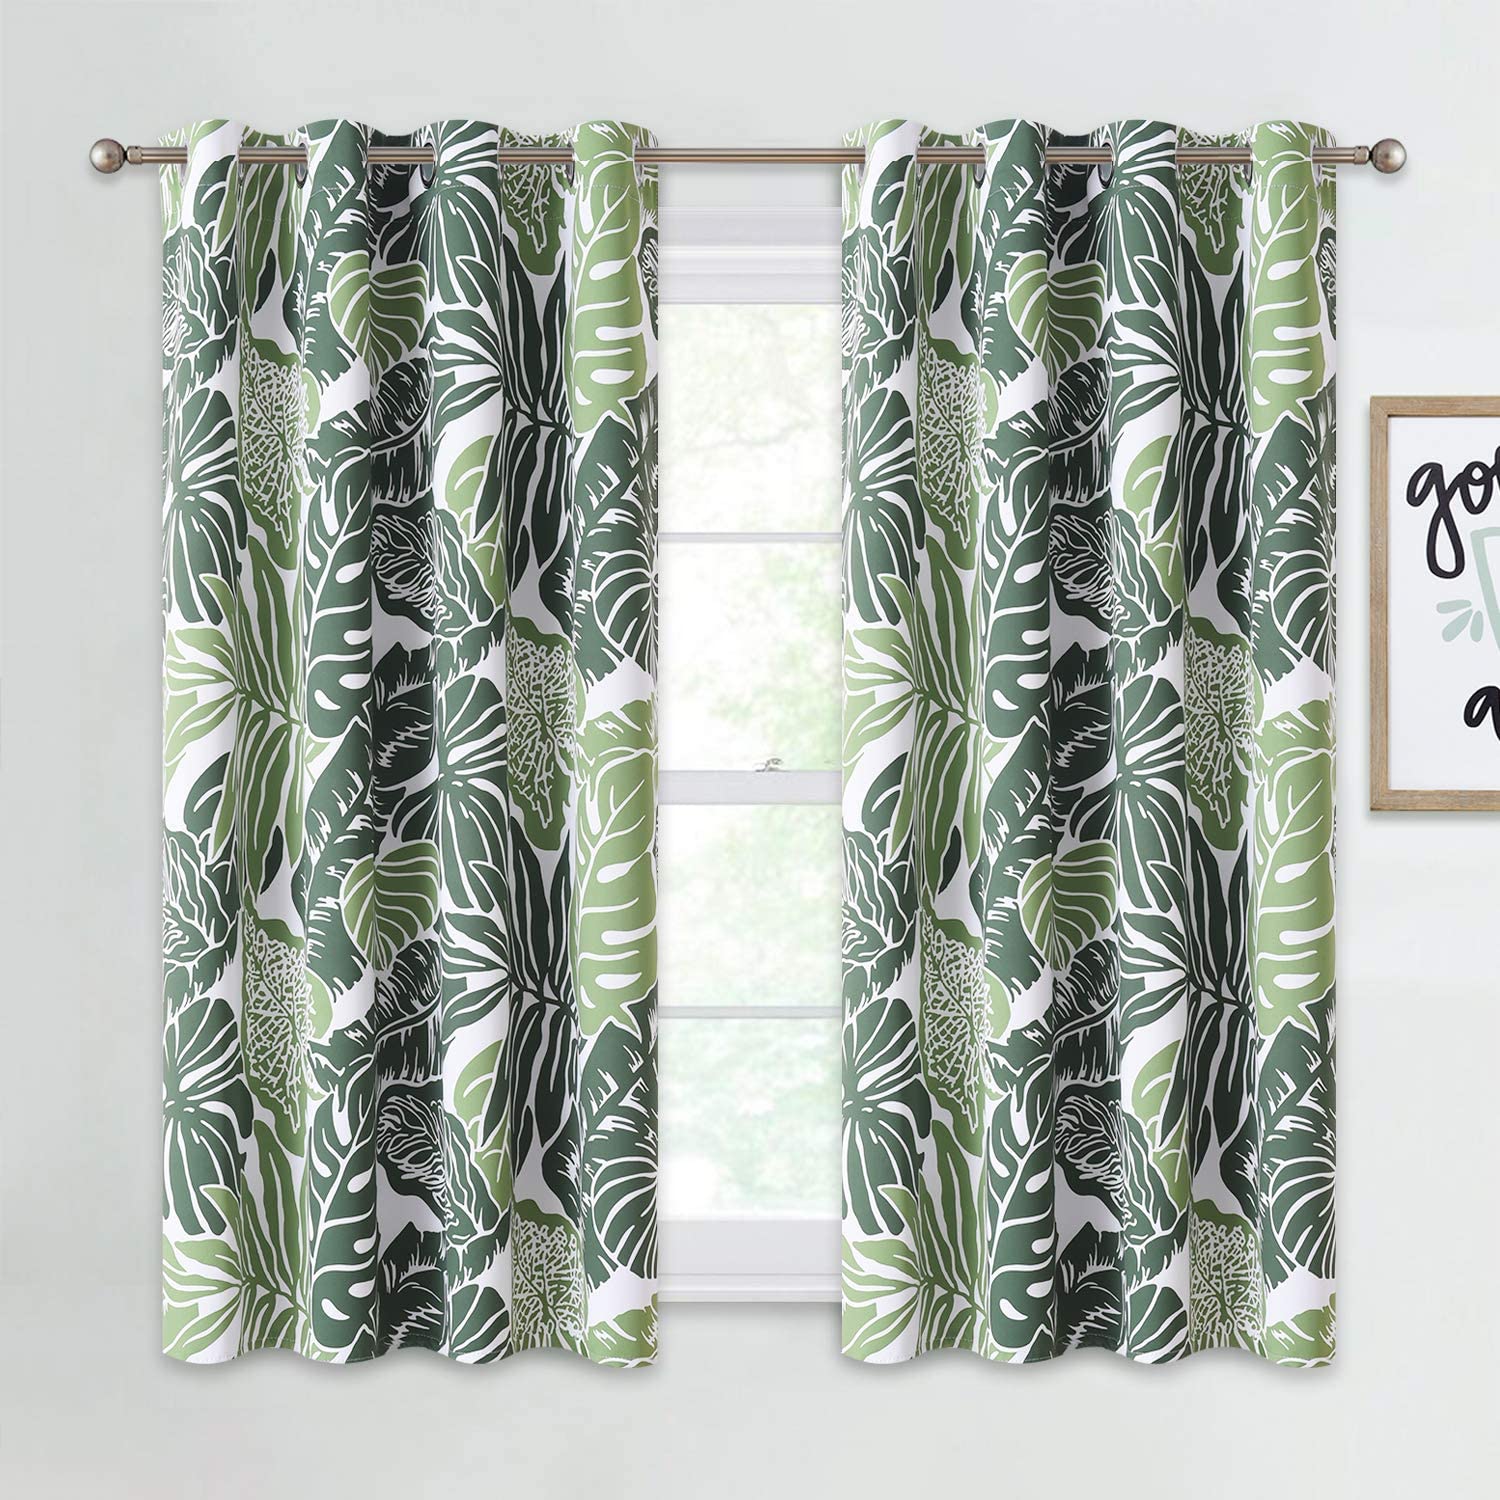 Palm Leaves Grommet Blackout Curtains For Living Room And Bedroom 2 Panels KGORGE Store